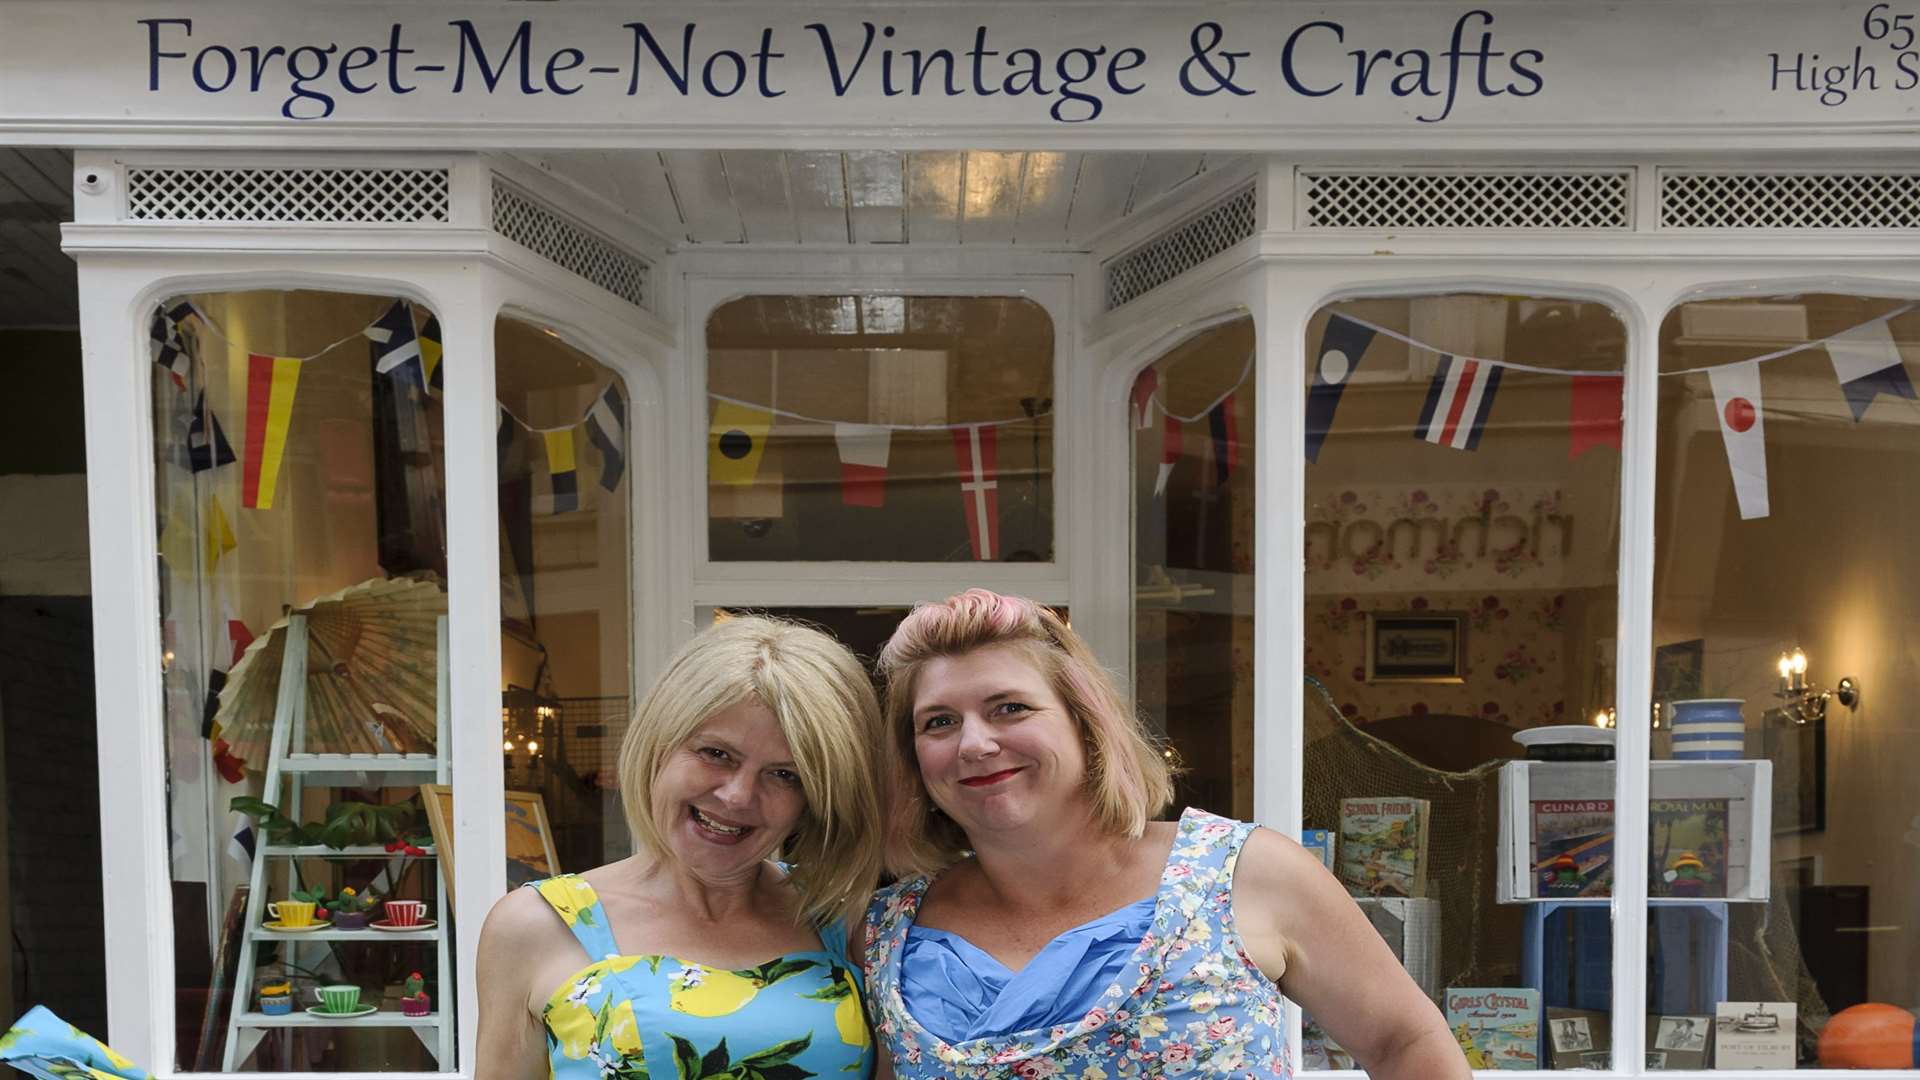 Clare Humphrys, left, and Sarah Cheshire. Opening of new shop Forget-Me-Not Vintage, in High Street, Gravesend